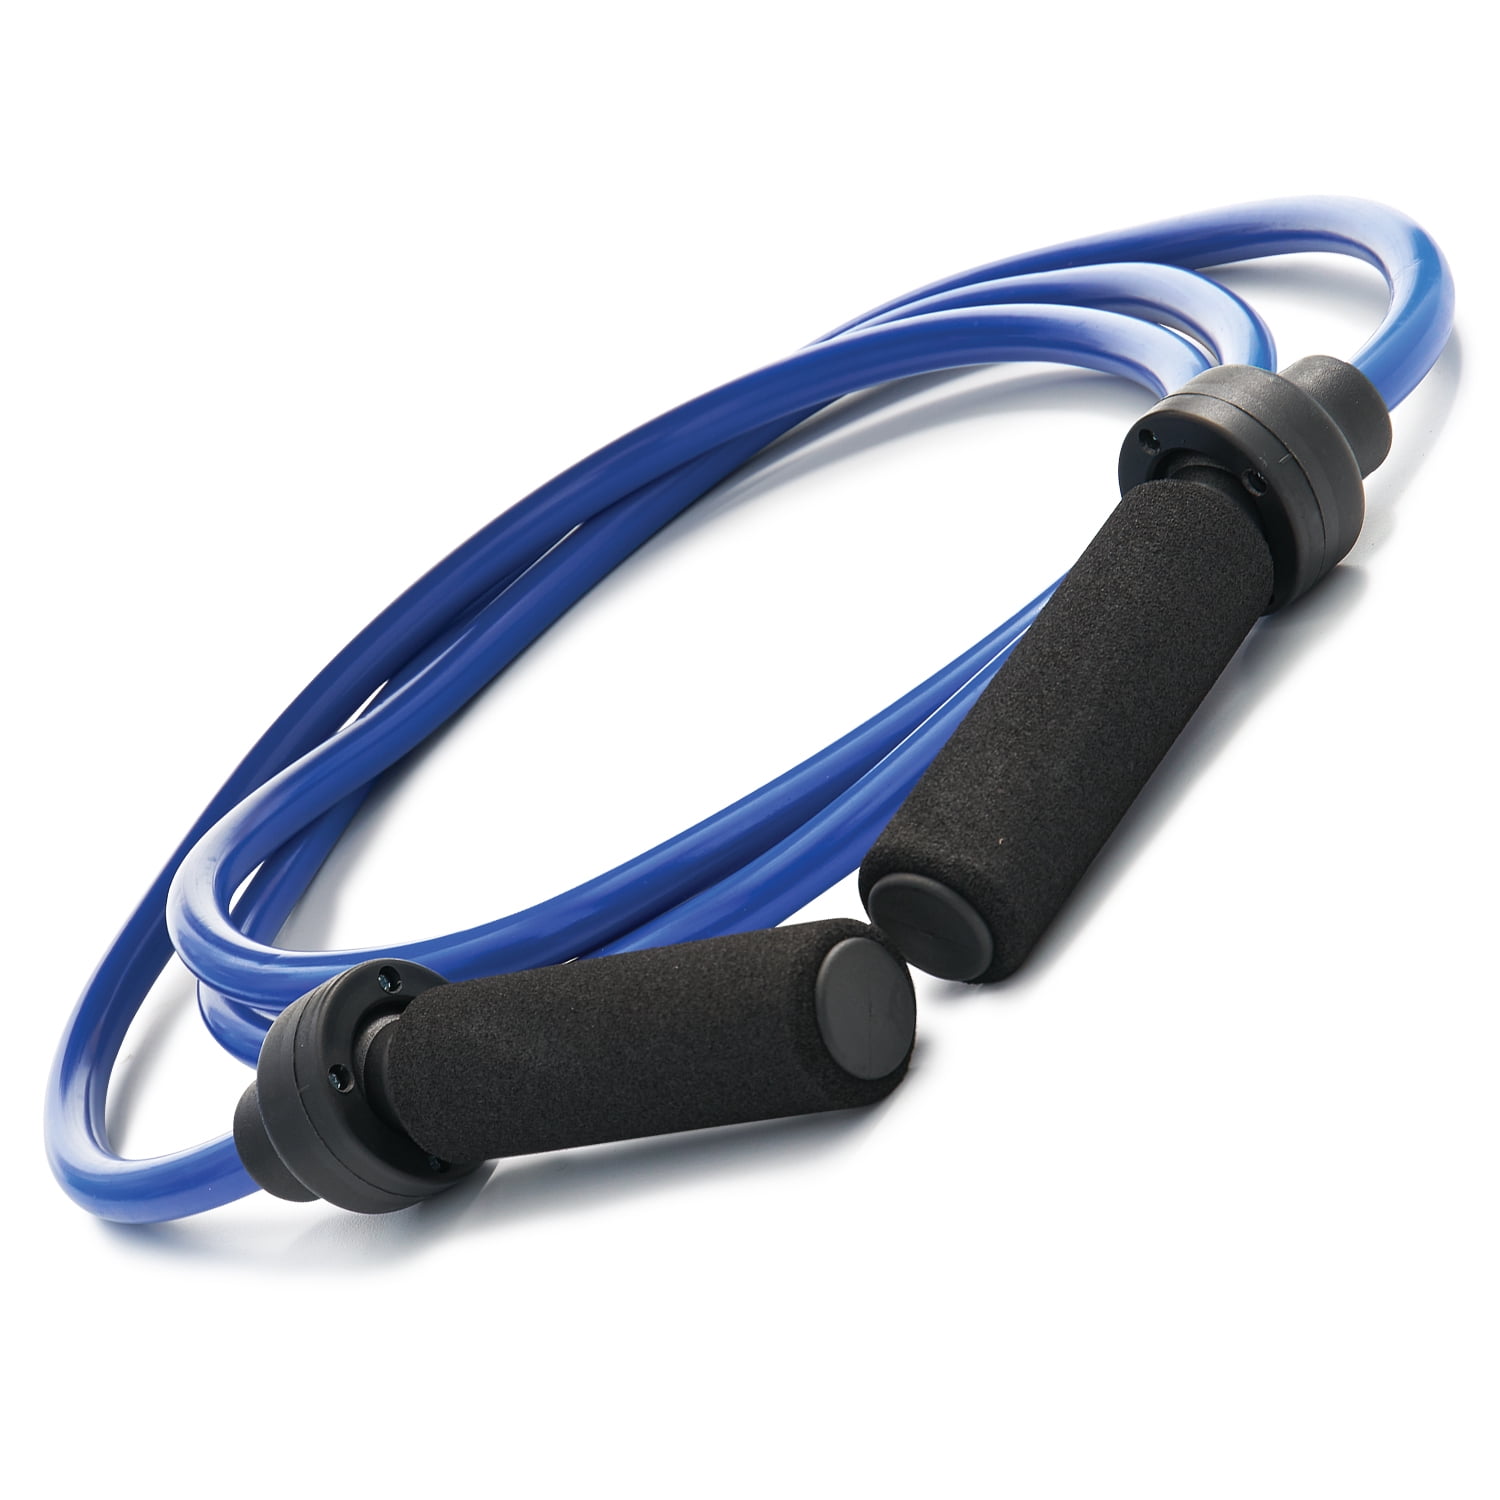 2 lb. Weighted Jump Rope